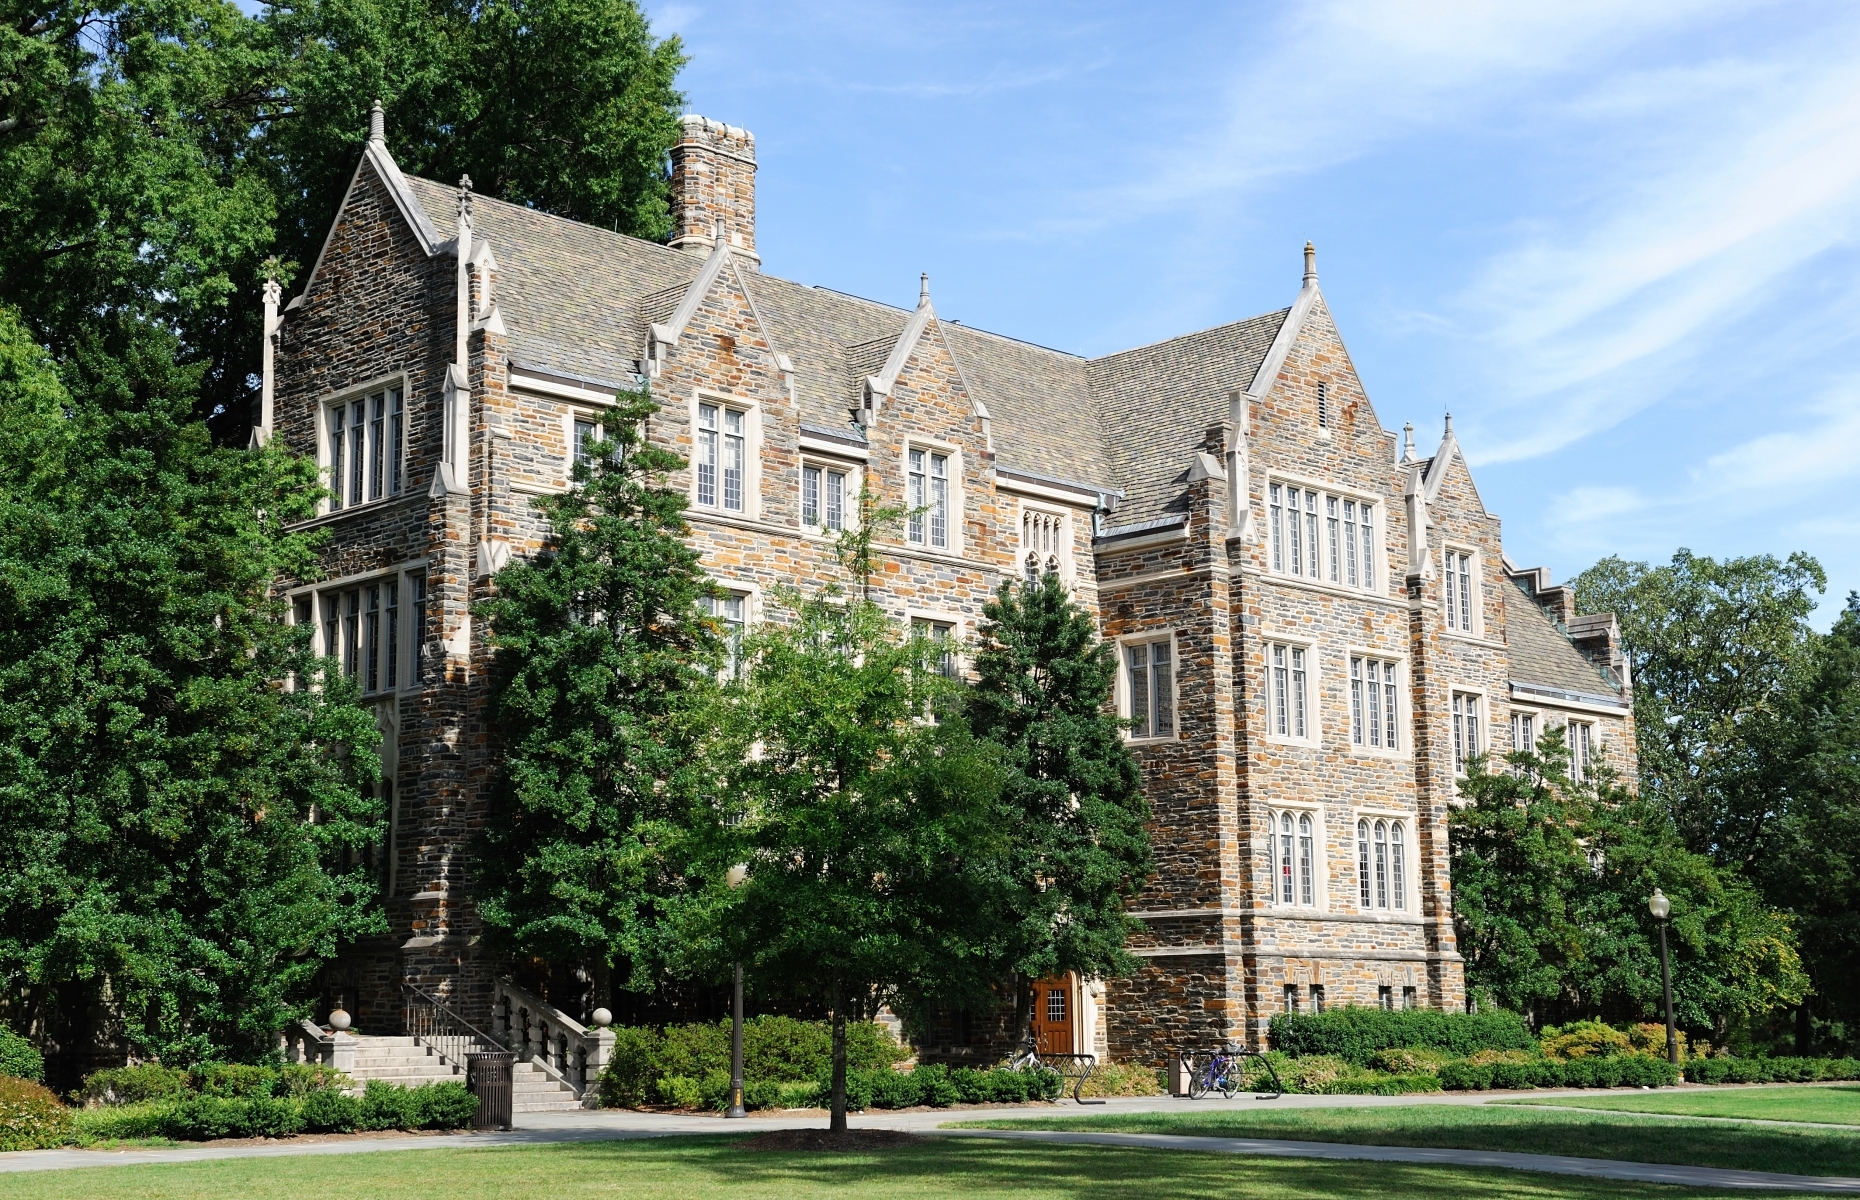 <p>Duke University has been called a “<a href="http://admissions.duke.edu/setting/campus" rel="noreferrer noopener">university in the forest</a>” because of the 7,200 acres of forested land within its massive campus, whose buildings were designed in the Collegiate Gothic and Georgian styles.</p>